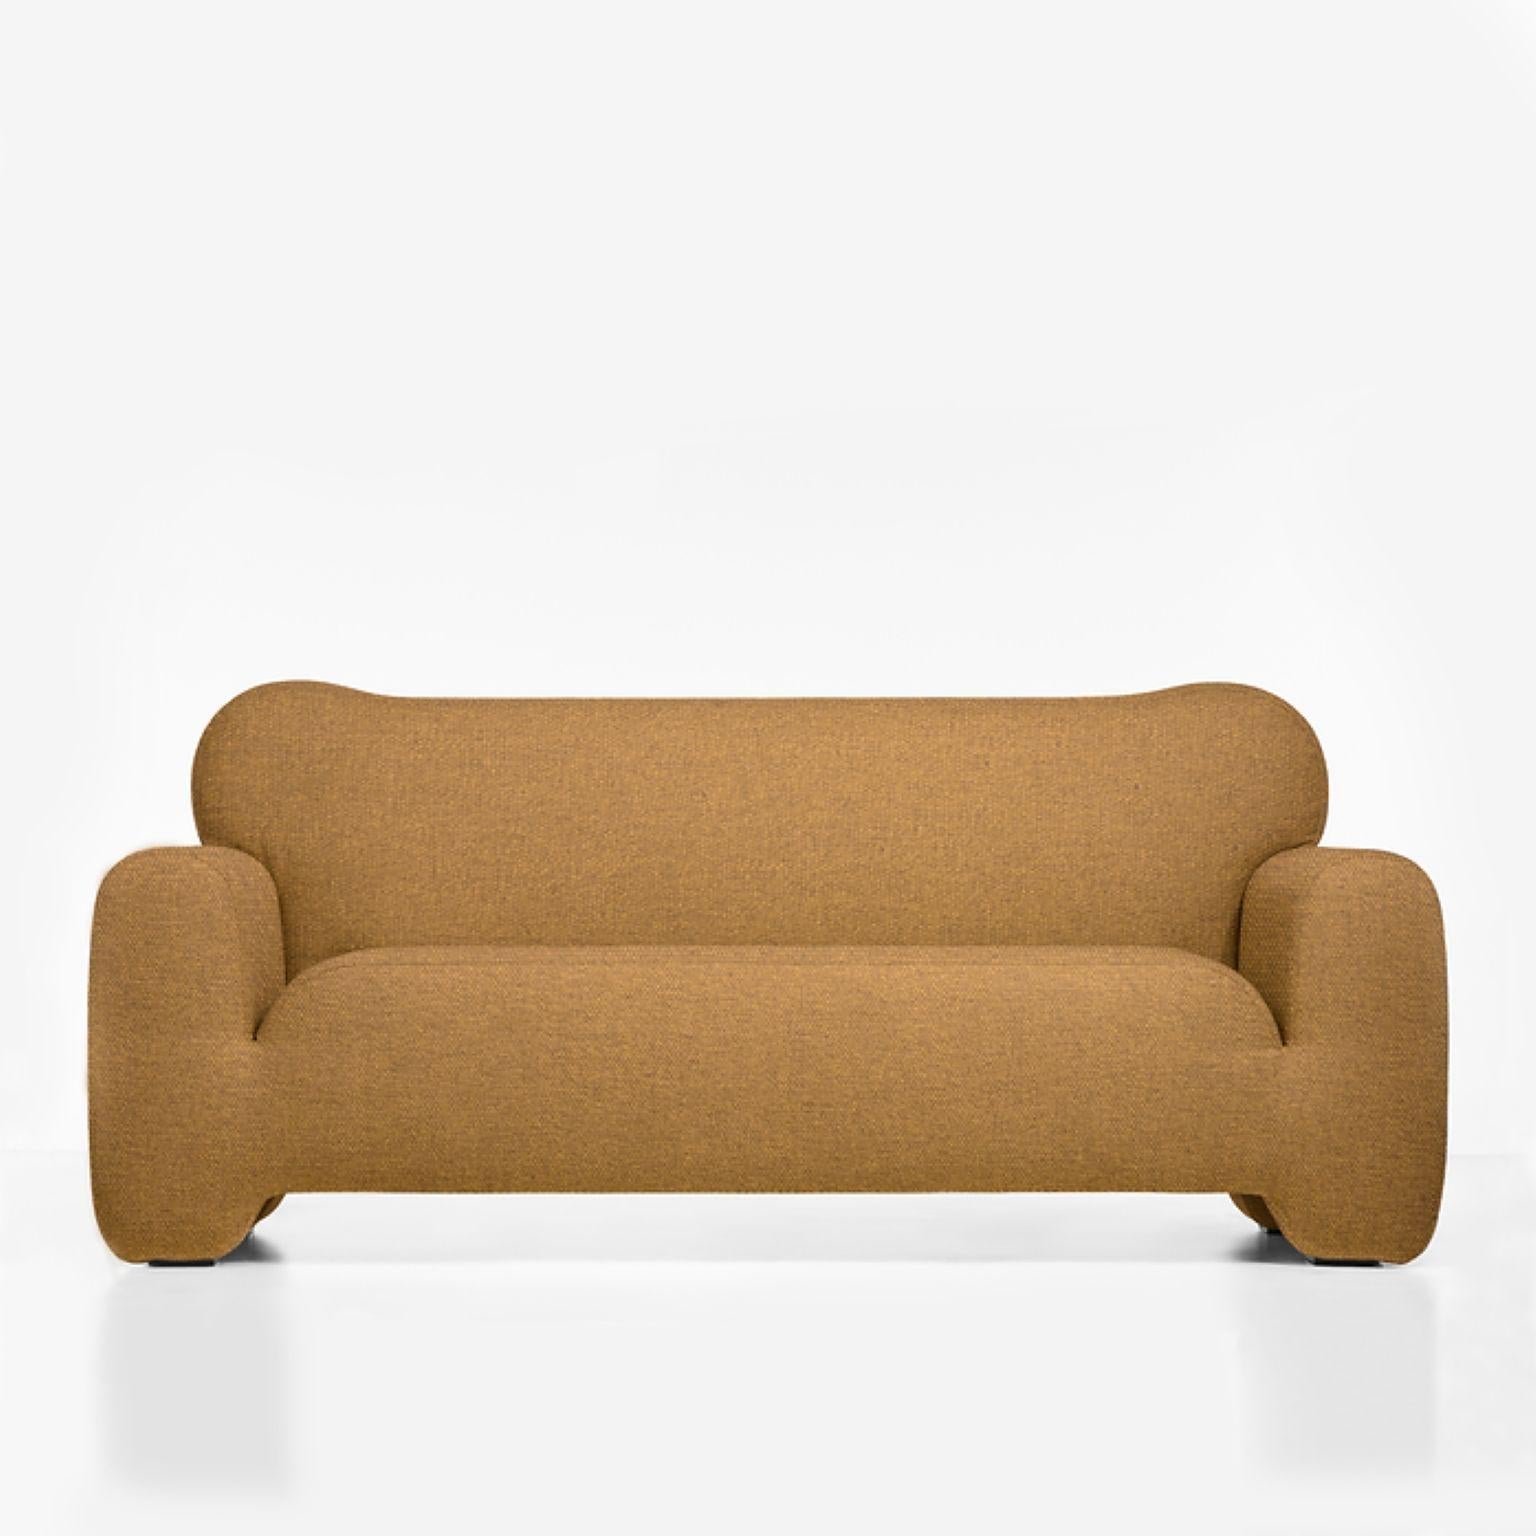 Pampukh sofa by Faina.
Design: Victoriya Yakusha
Materials: textile, foam rubber, sintepon, wood.
Dimensions: W 240 x D 82 x H 79 cm.

Unusual convex lines of the Pampukh series are ideally combined with its volumetric silhouette. PAMPUKH seems